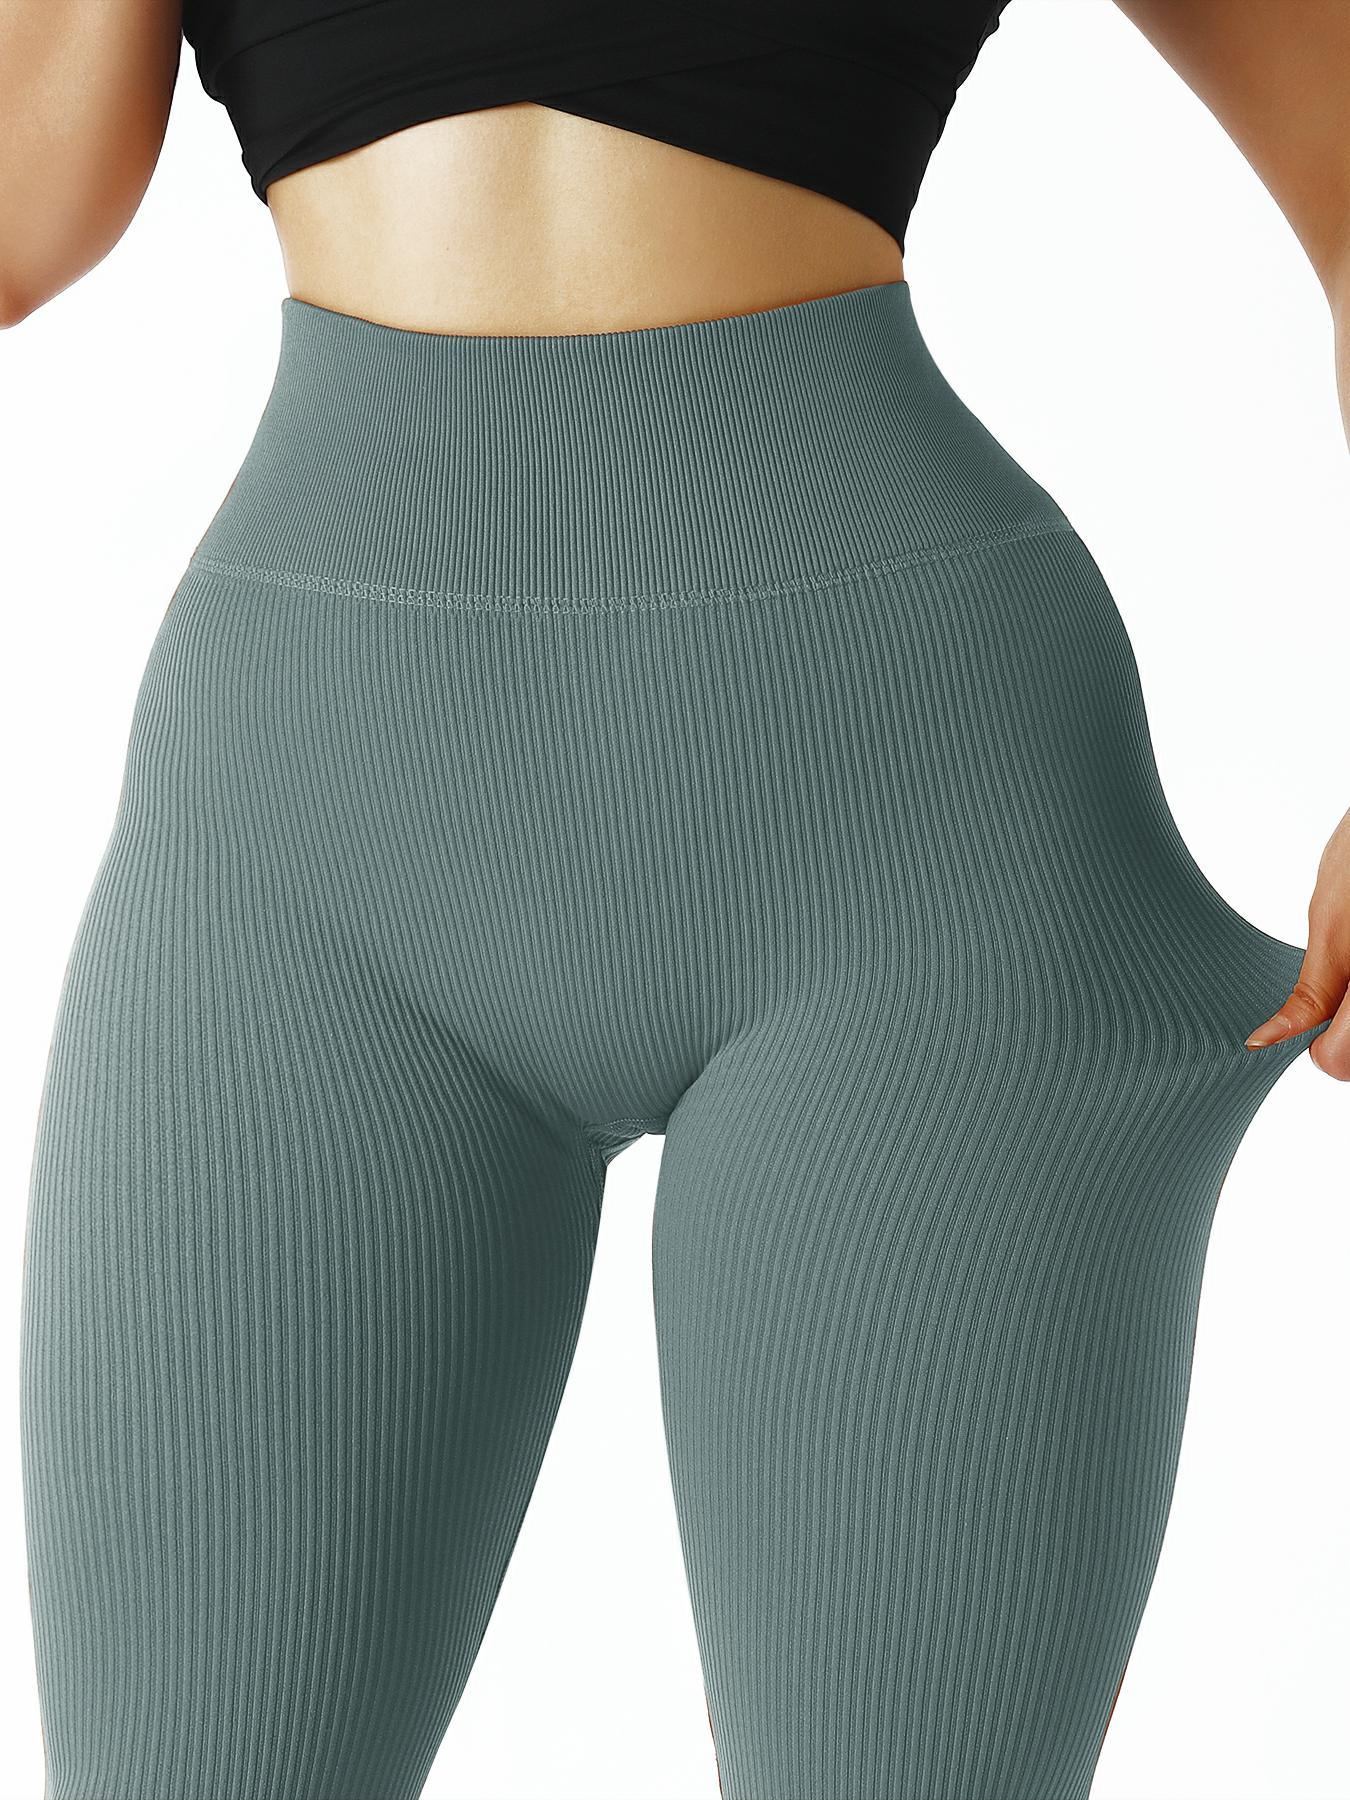 High Waist Seamless Ribbed Seamless Workout Leggings For Women Push Up,  Striped Design, Ideal For Fitness, Gym, And Sports Sexy And Comfortable Gym  Legins For Ladies Style 221007 From Xue03, $9.46